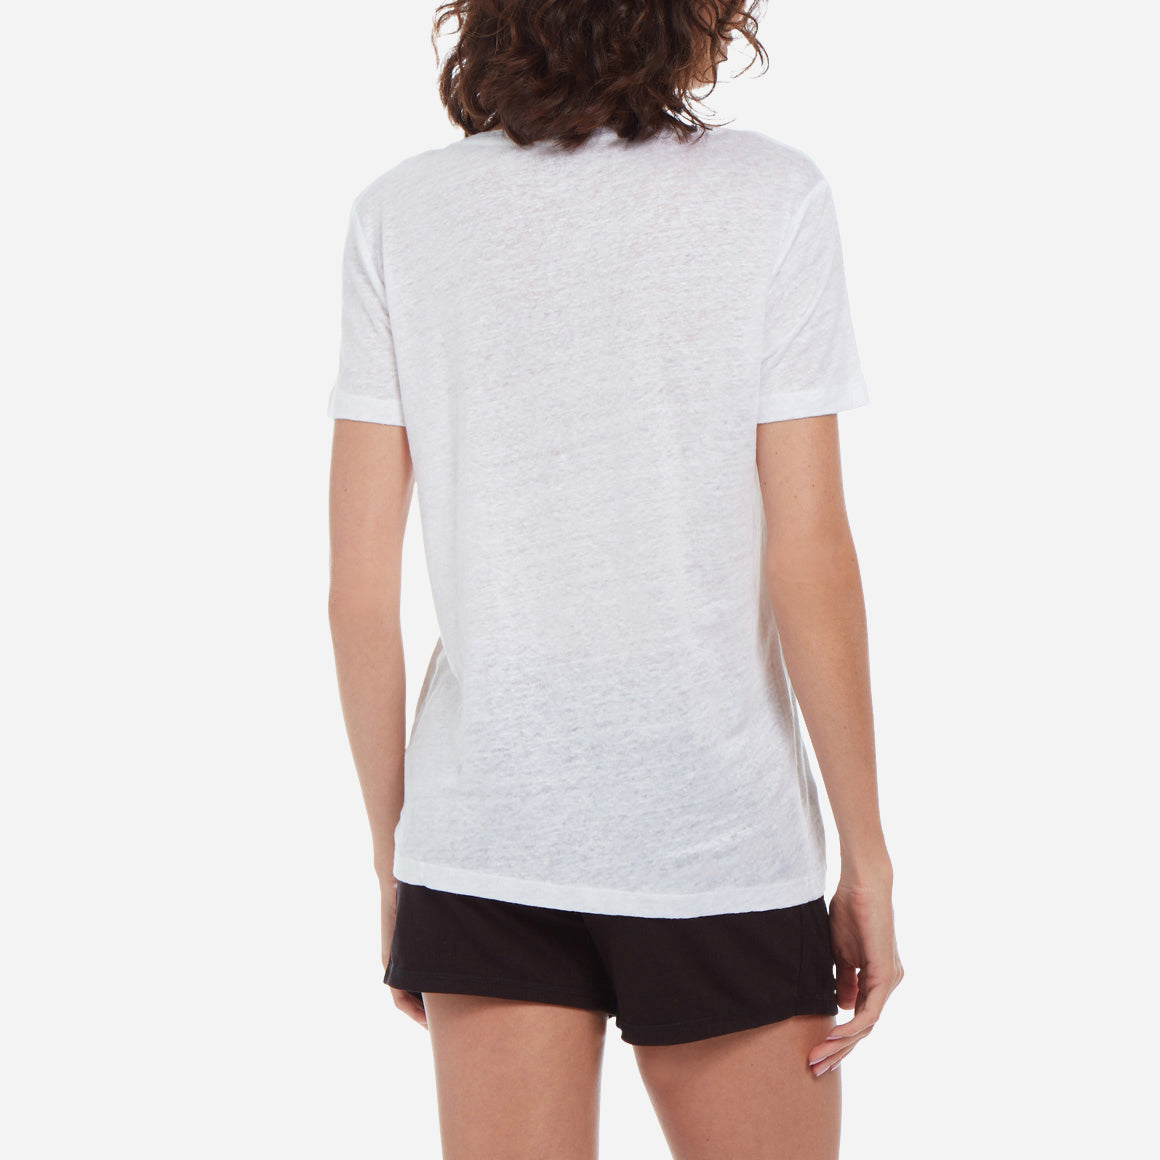 Back-facing model wearing a white linen v-neck tee and black shorts.